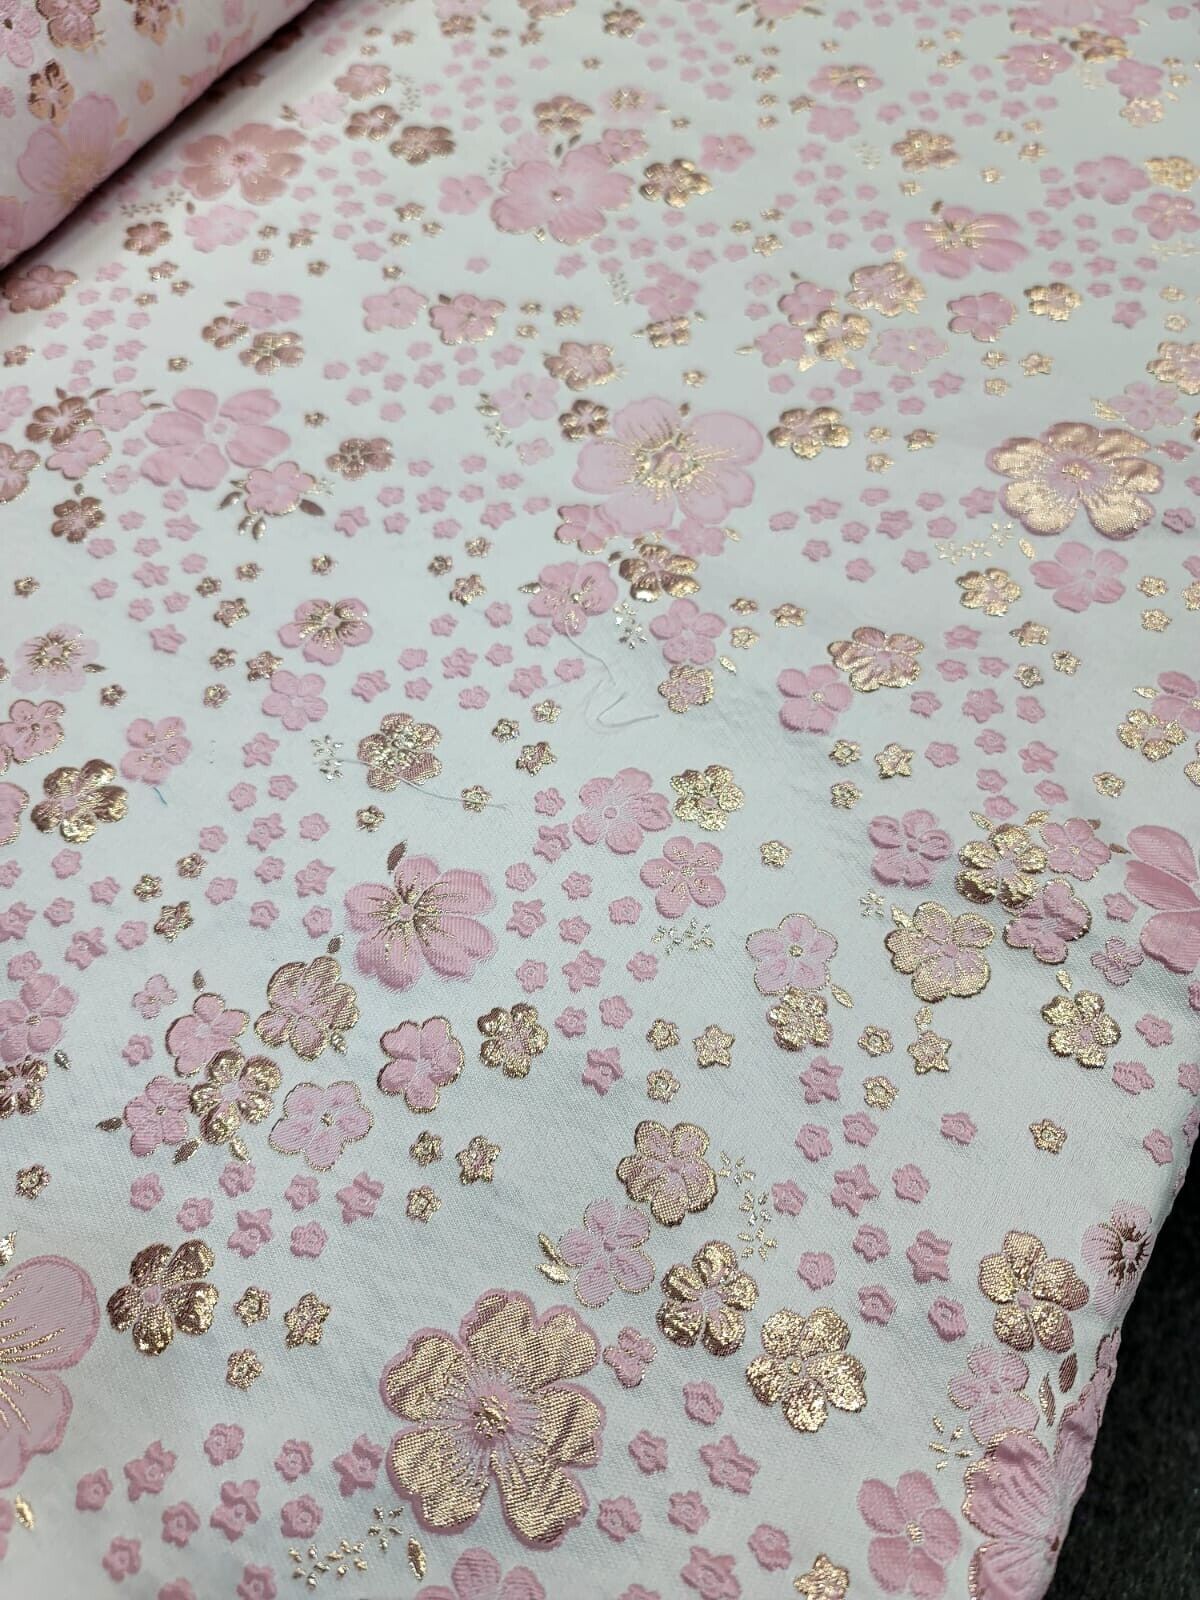 Pink and Gold Floral Brocade Fabric by the Yard - Stunning Rose Gold Metallic - Perfect for Elegance and Fashion